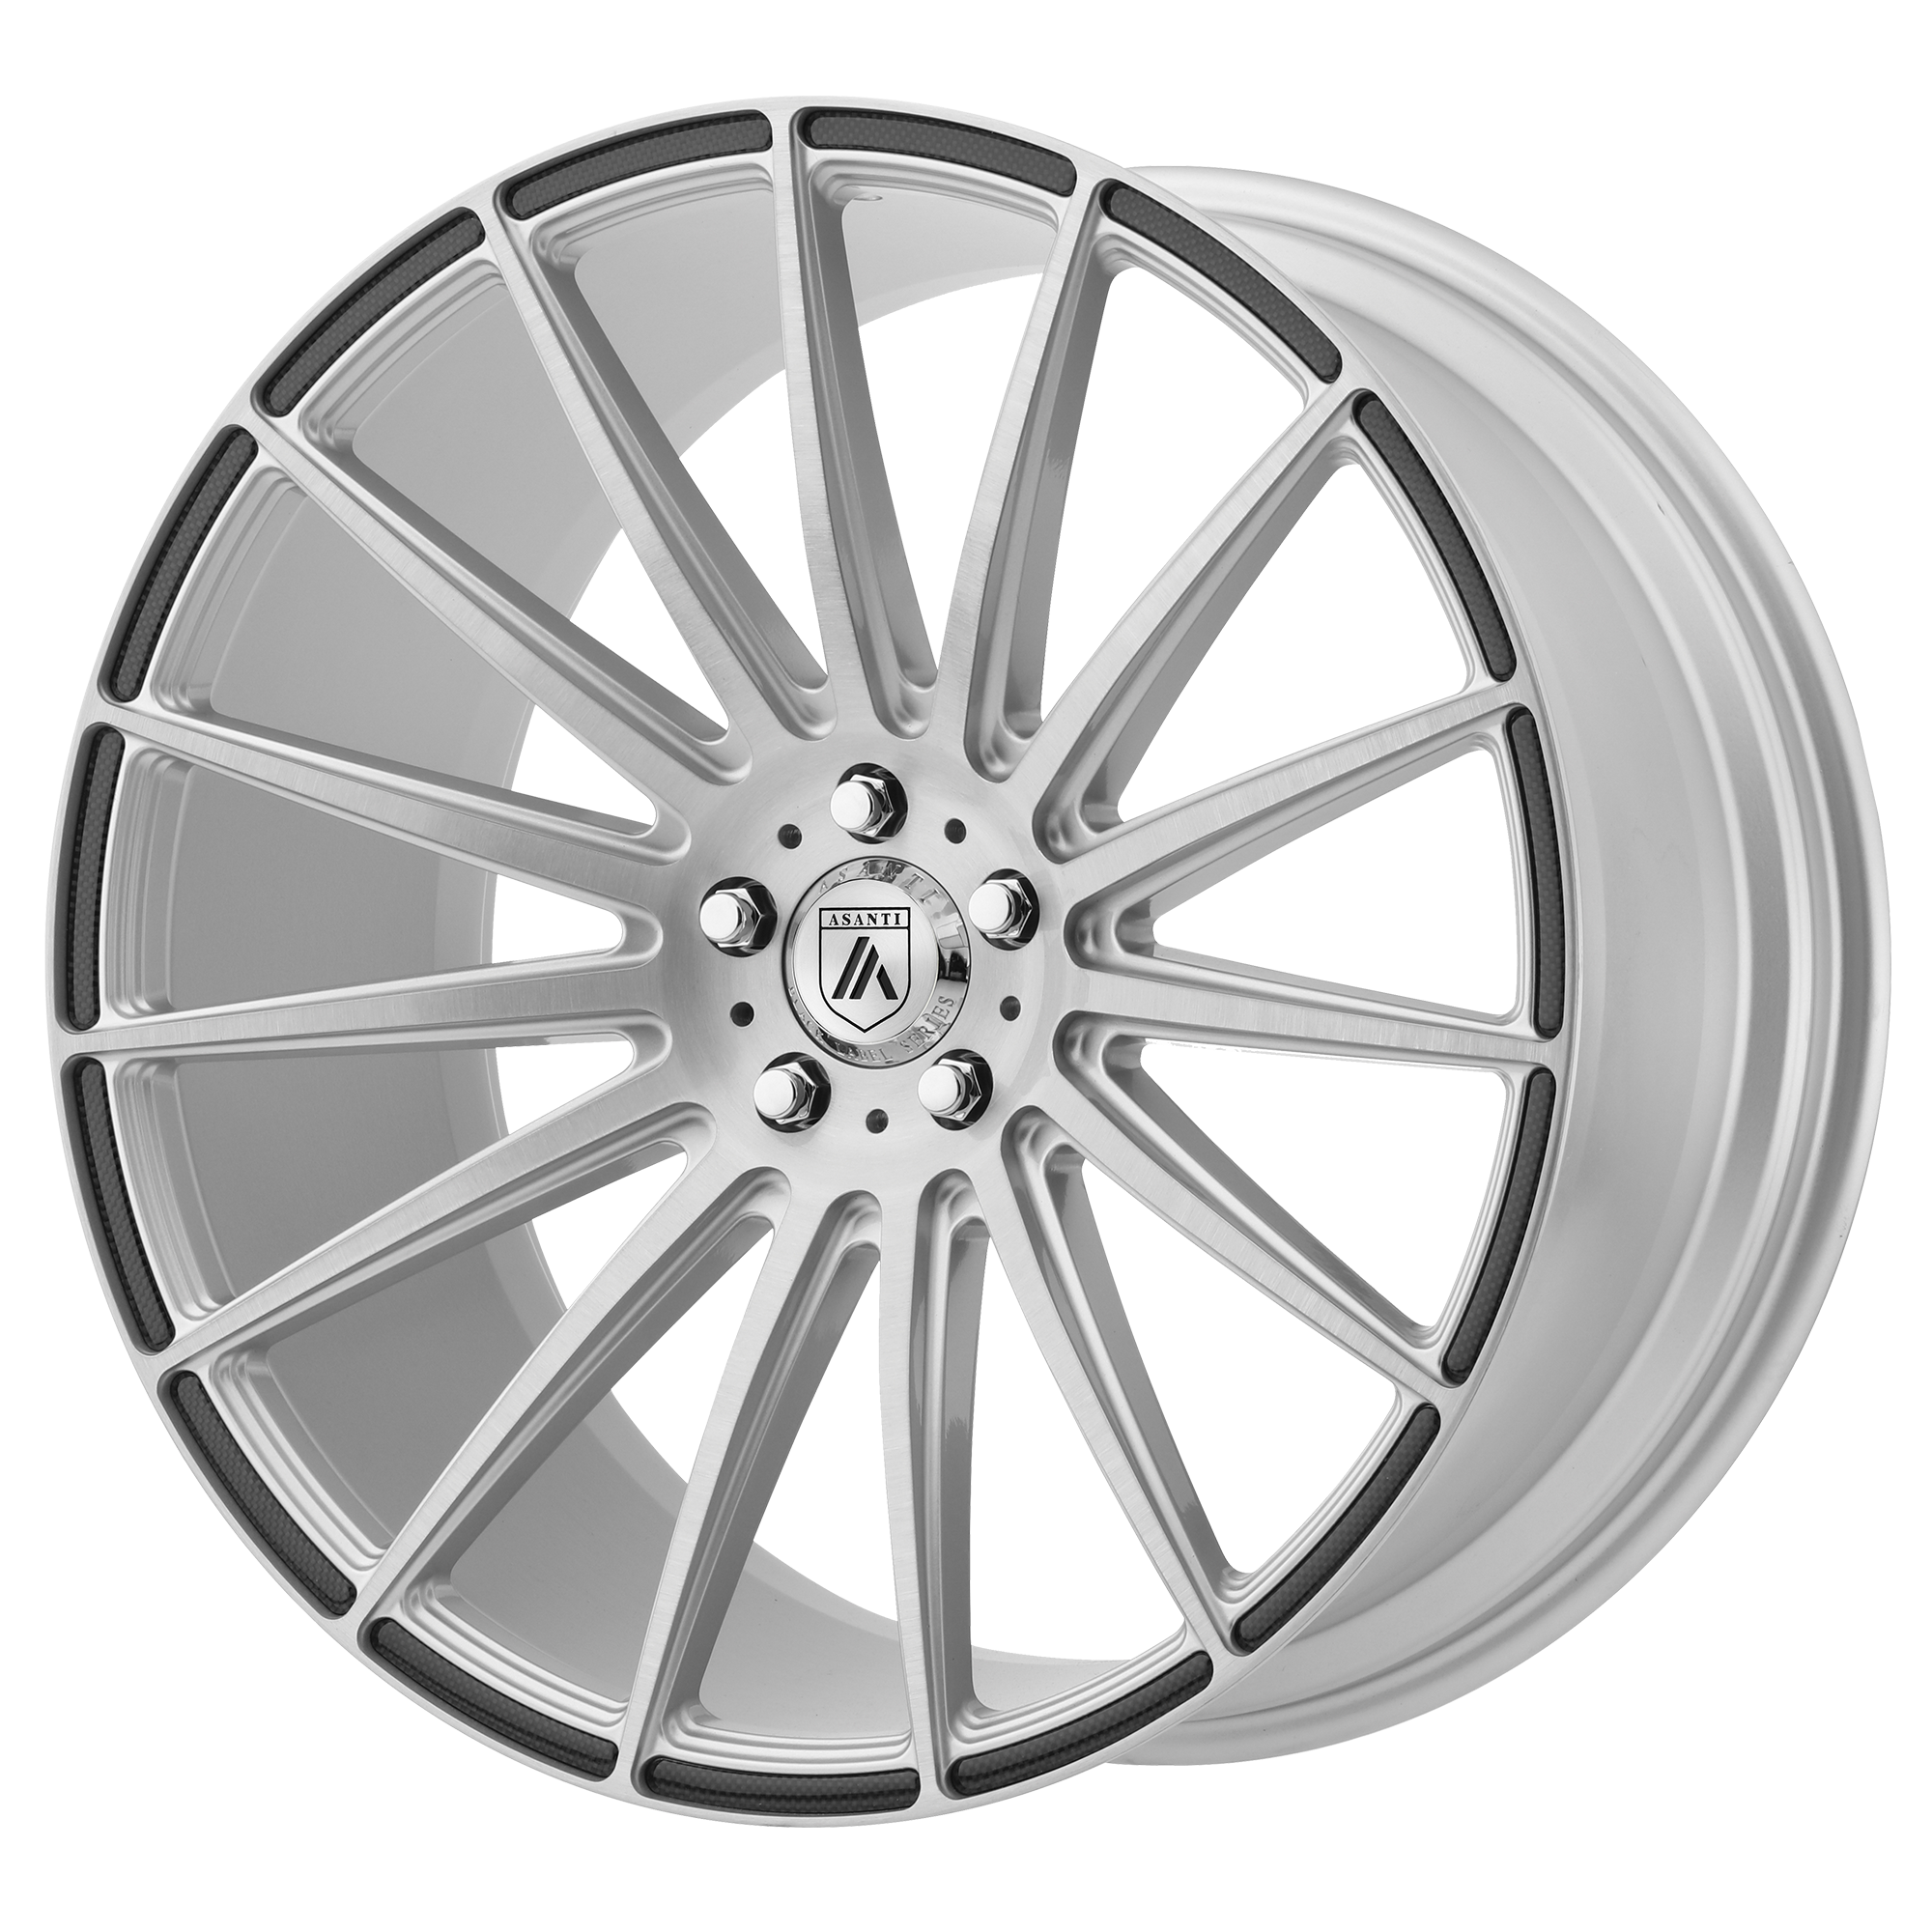 POLARIS 20x10.5 Blank BRUSHED SILVER W/ CARBON FIBER INSERTS (38.00 - 45.00 mm) - Tires and Engine Performance